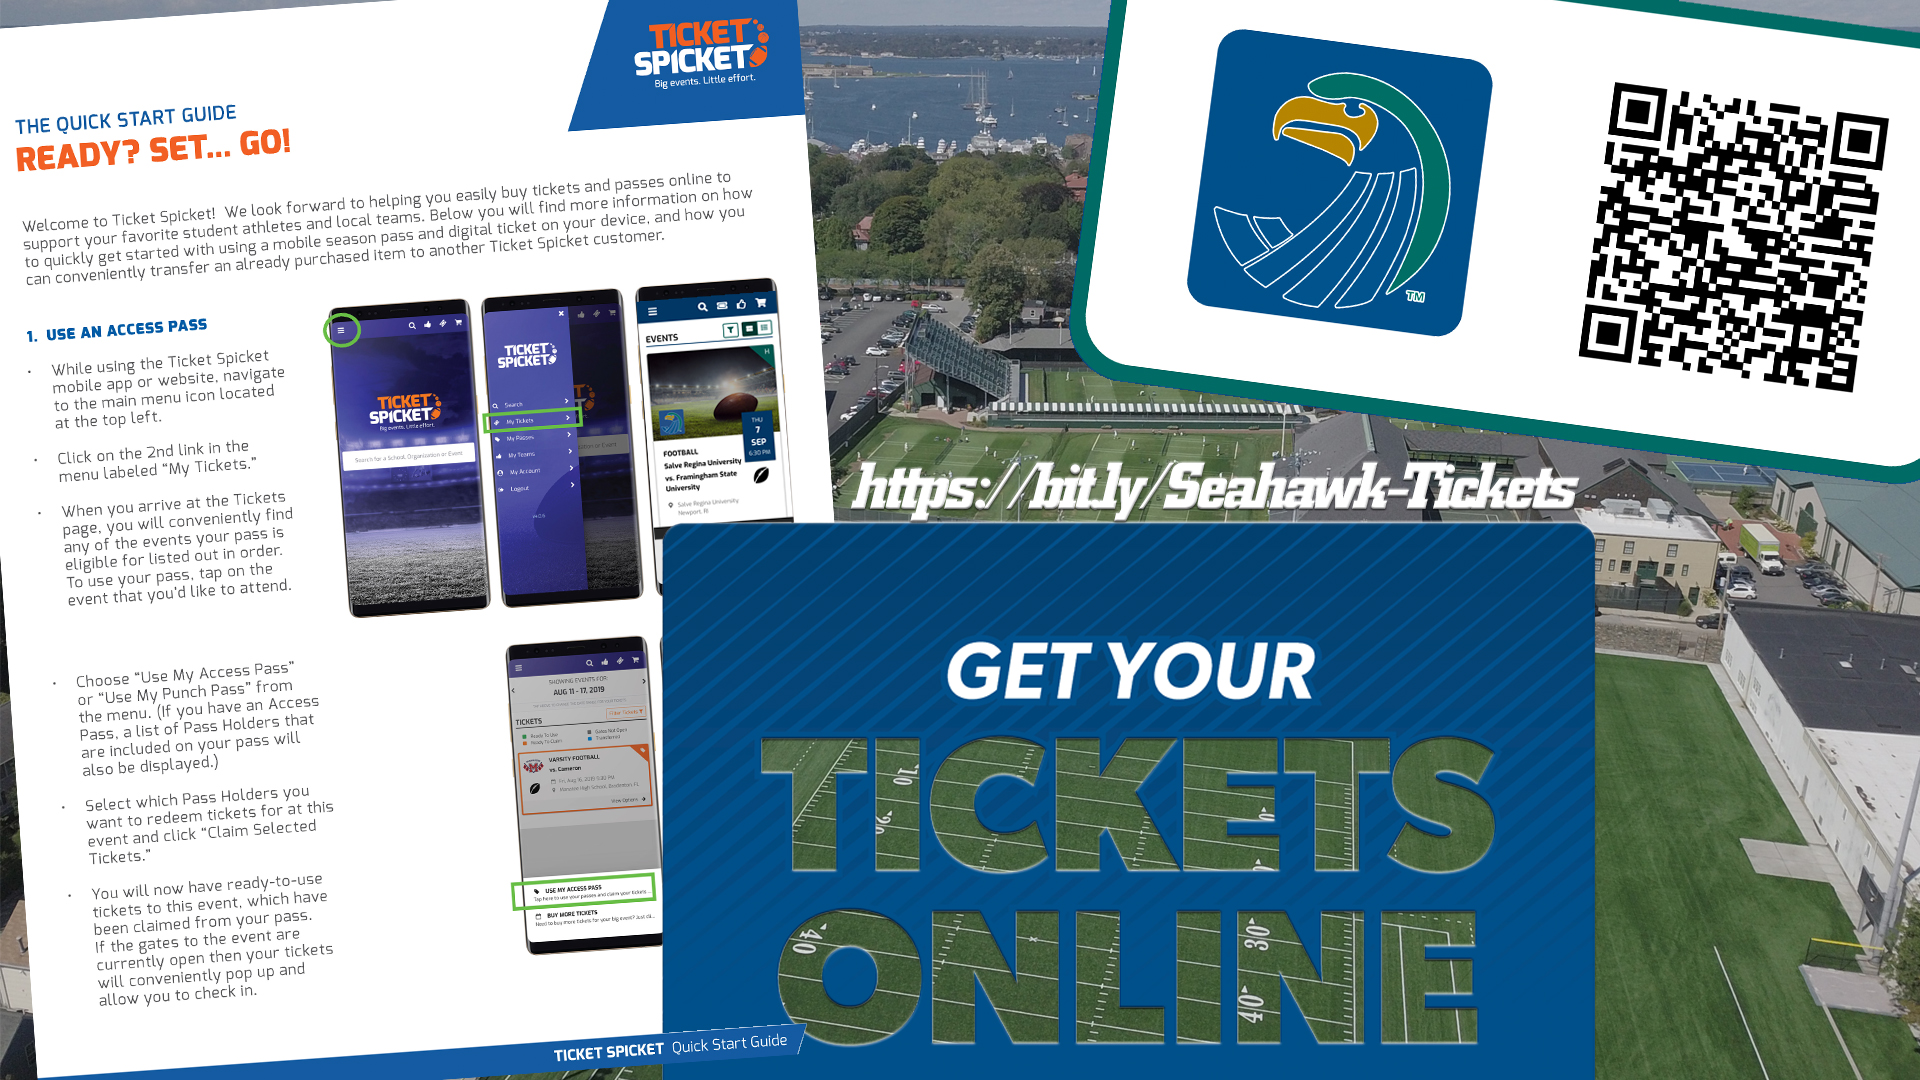 Ticket Spicket helps Seahawk fans and their opposing team's fans easly buy tickets and passes online